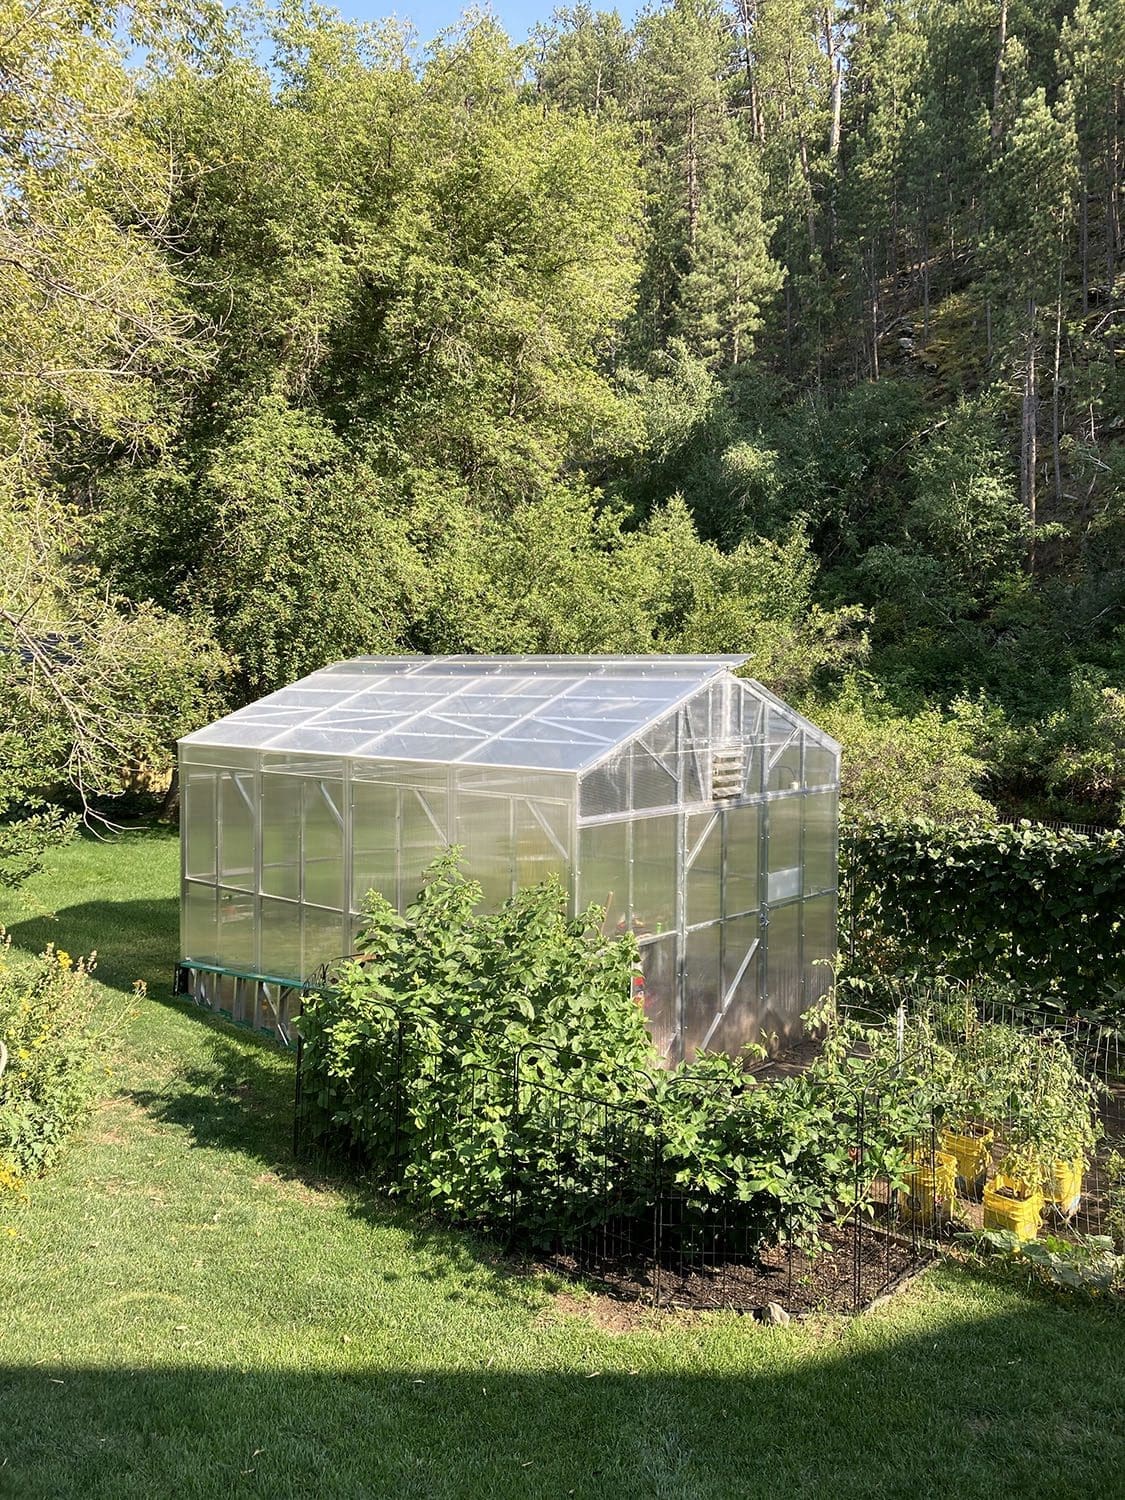 View of the greenhouse